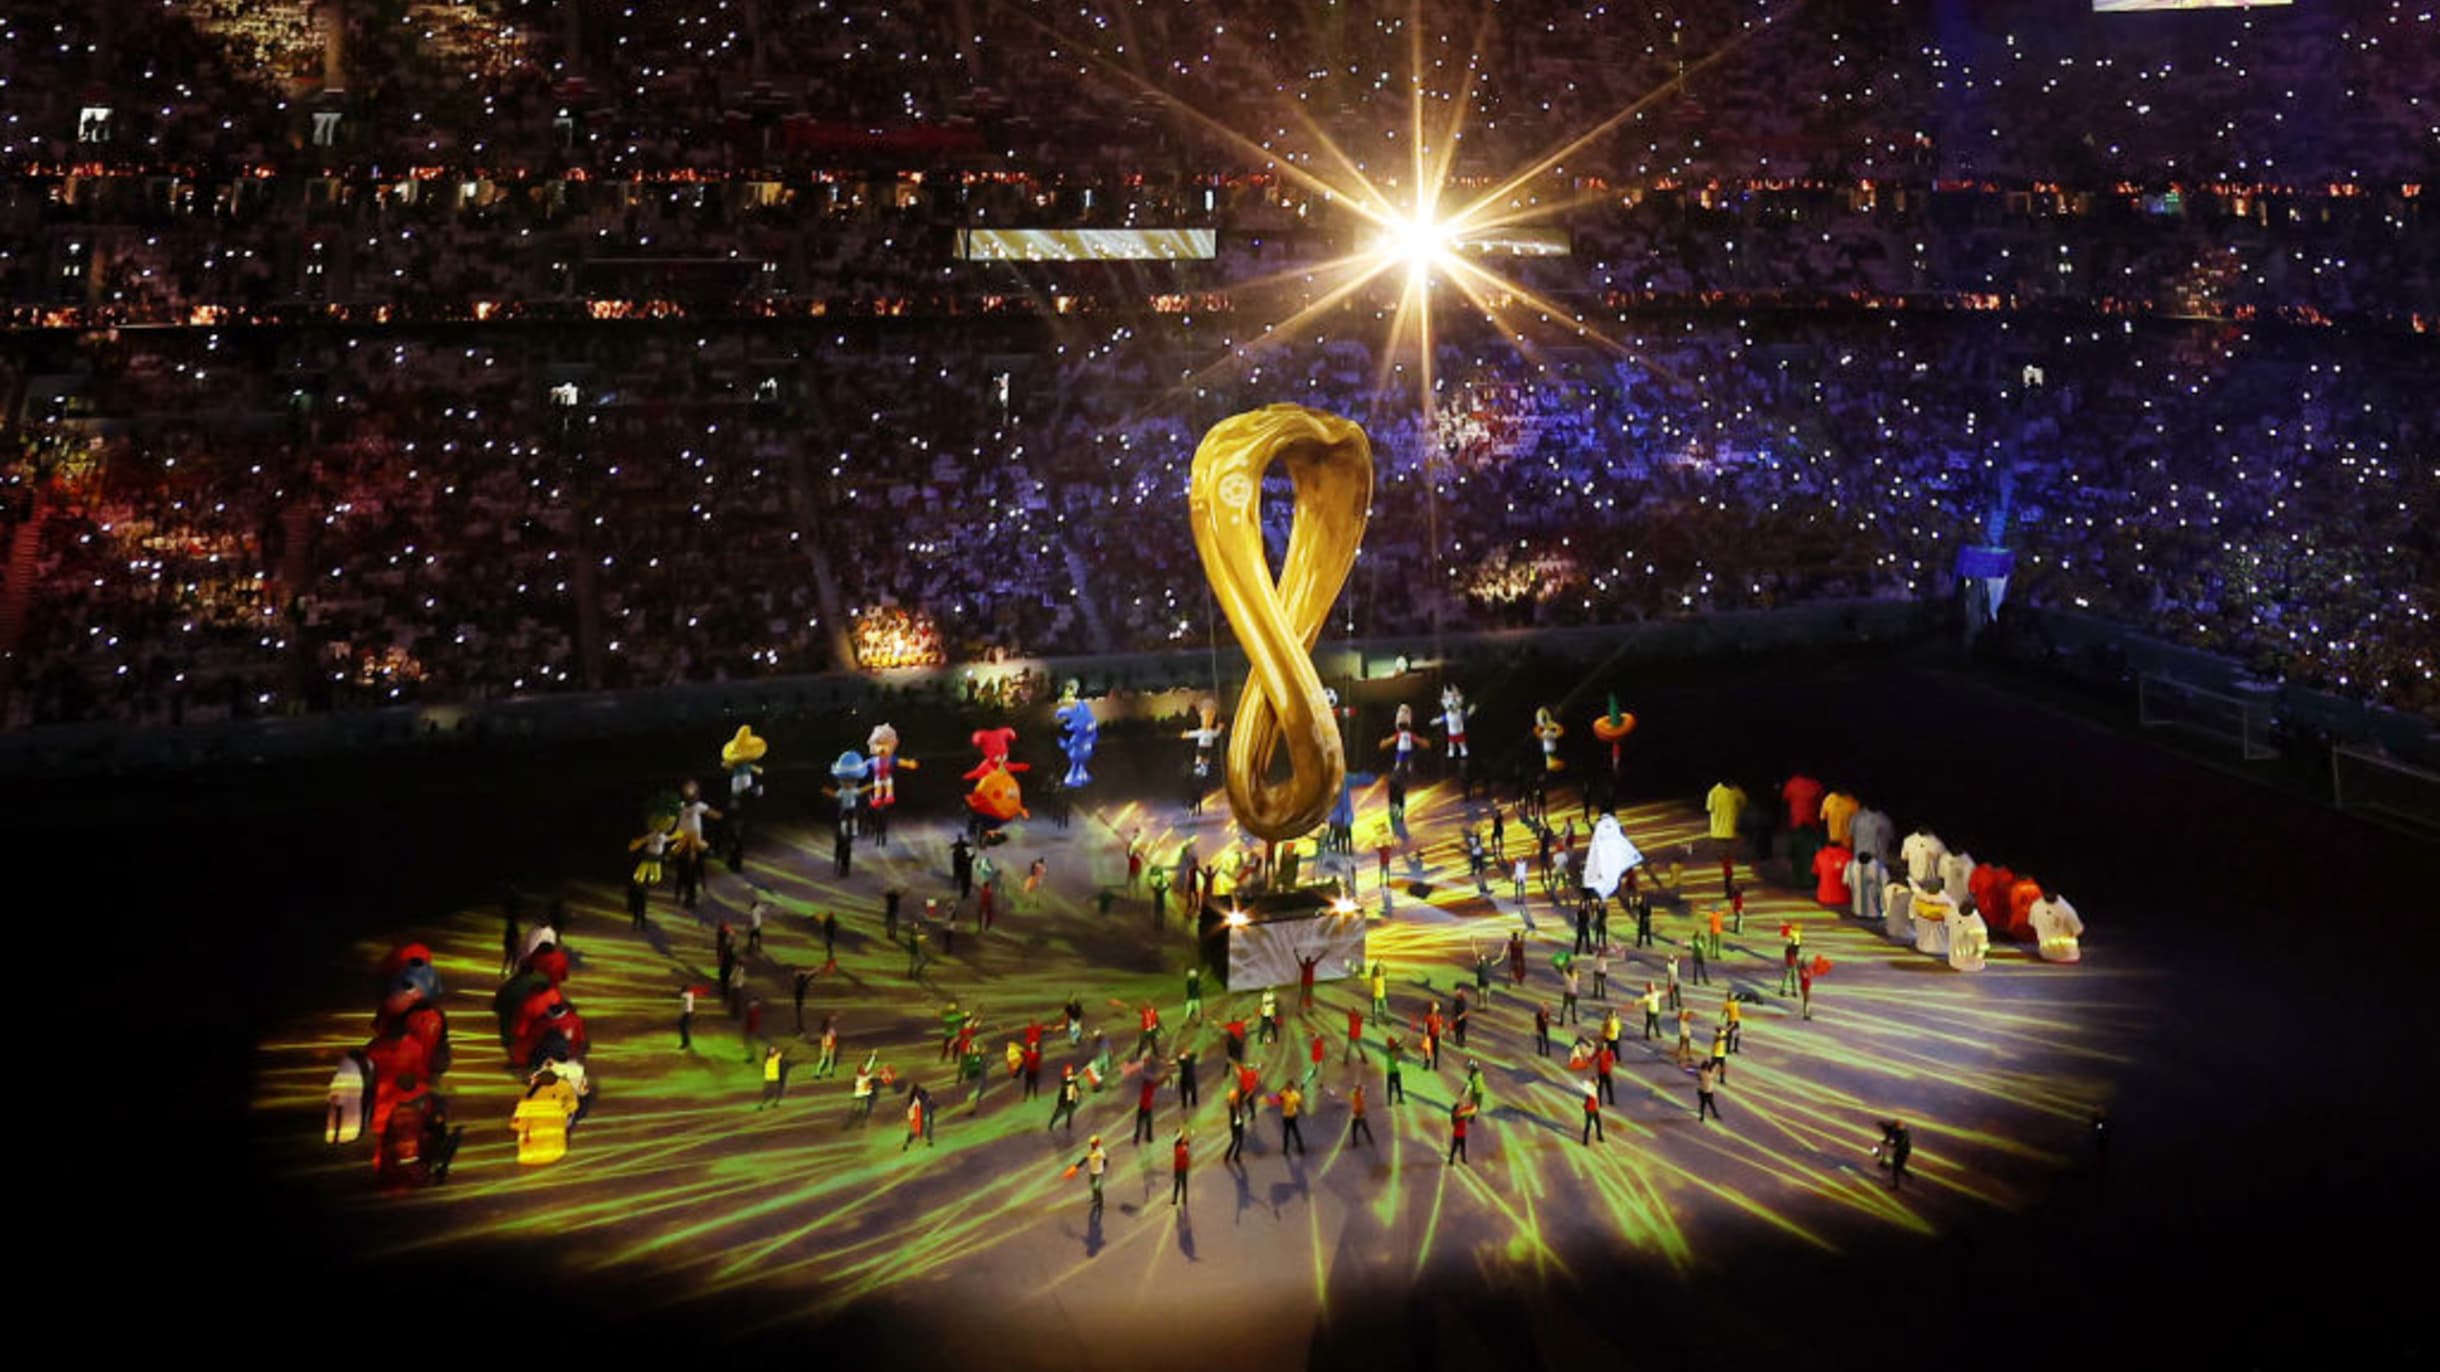 FIFA World Cup 2022 closing ceremony Know start time in India and watch live streaming and telecast